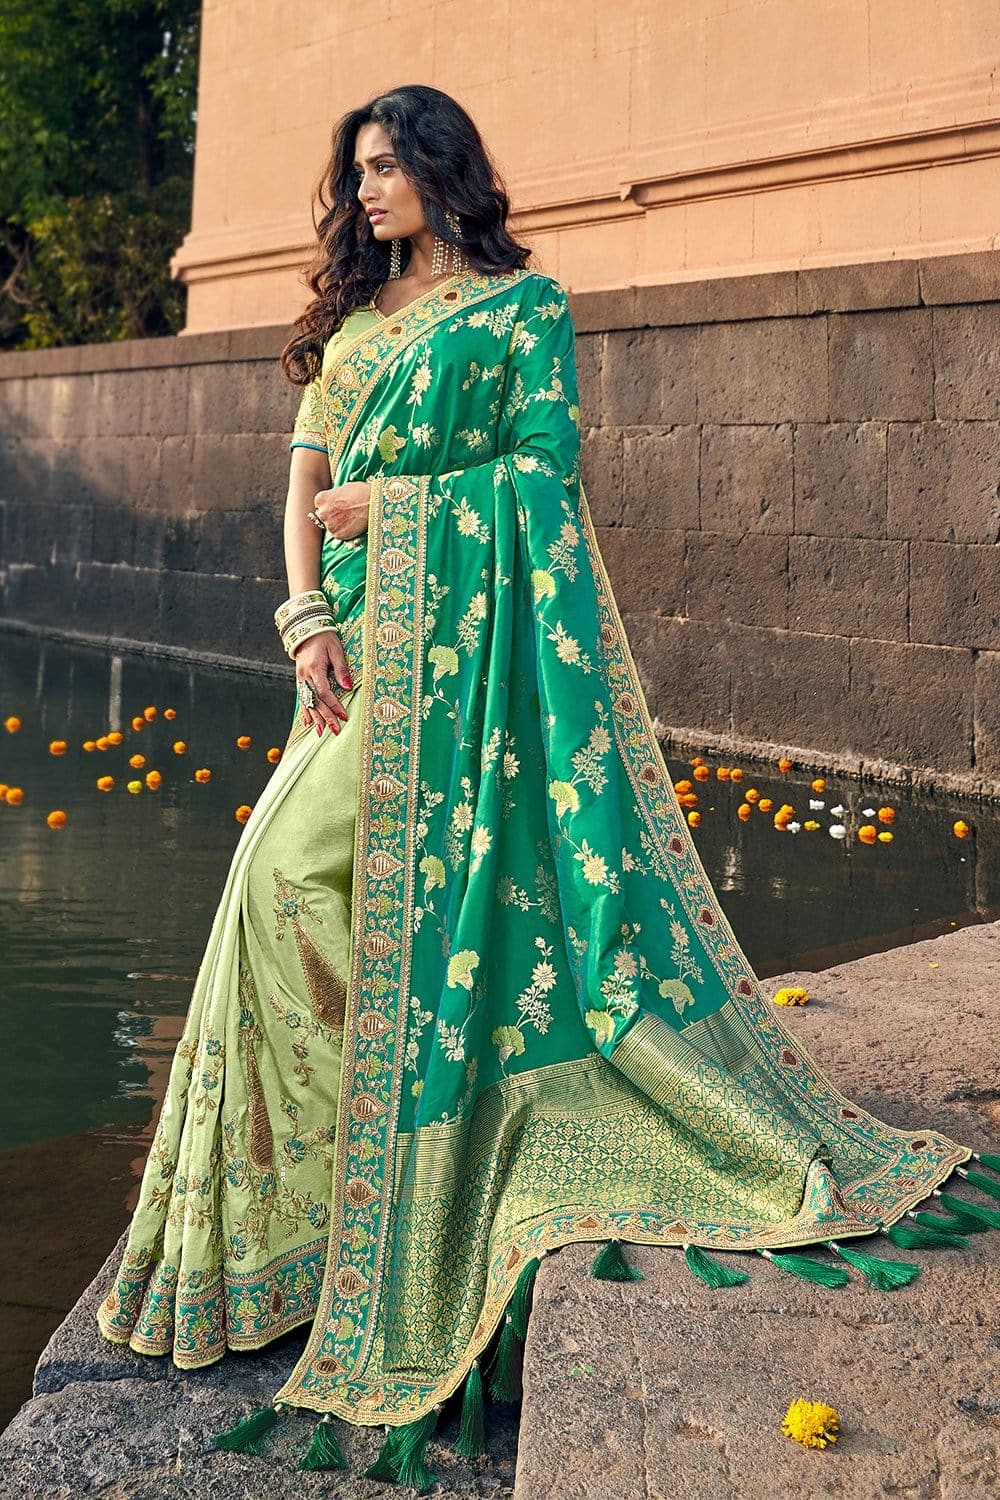 Shades of green woven designer banarasi saree with embroidered silk blouse - Wedding sutra collection - Buy online on Karagiri - Free shipping to USA